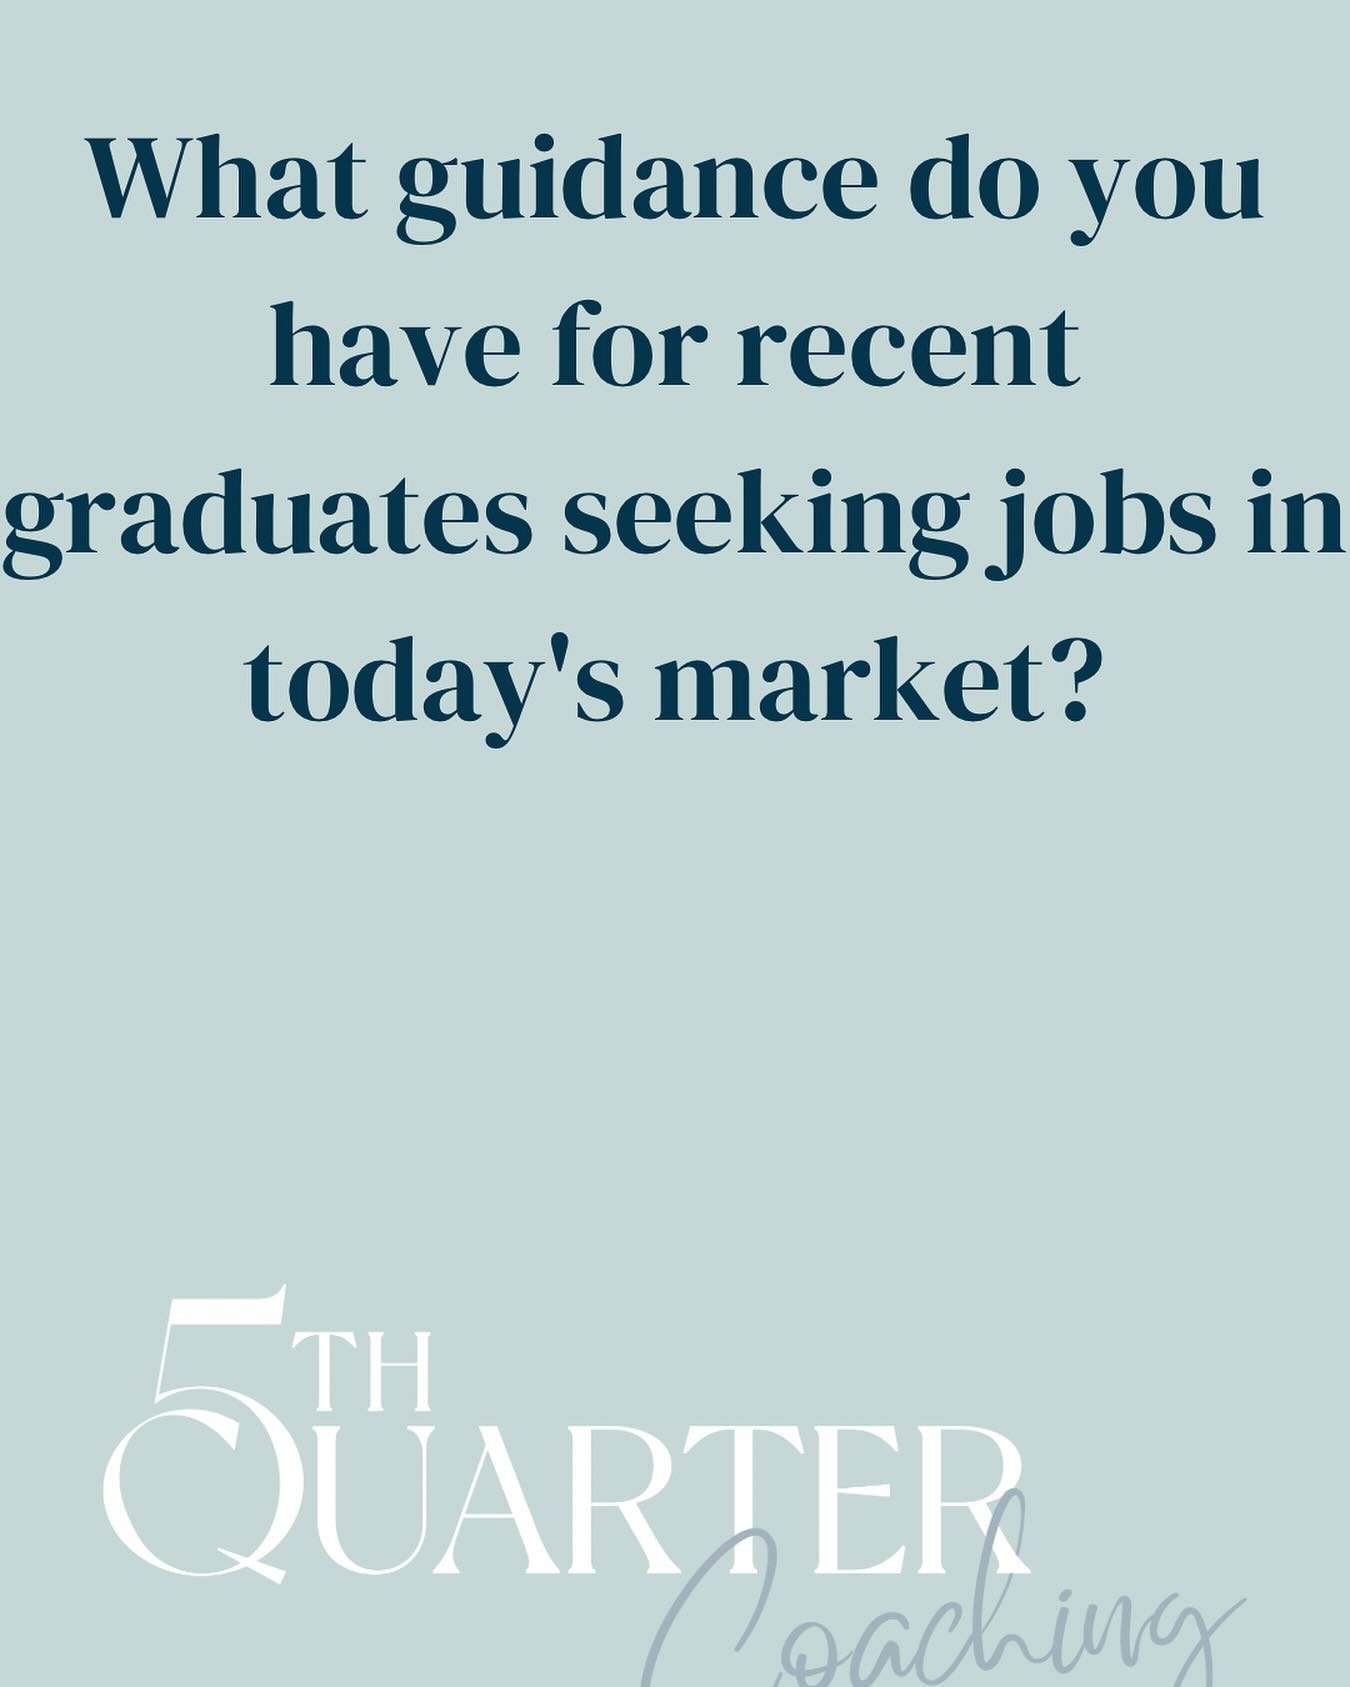 Stay patient, stay open minded, and utilize your network. While the job market can seem intimidating, companies are actively recruiting - just be ready for the job hunt to potentially last longer than anticipated. Engage in numerous conversations. Yo